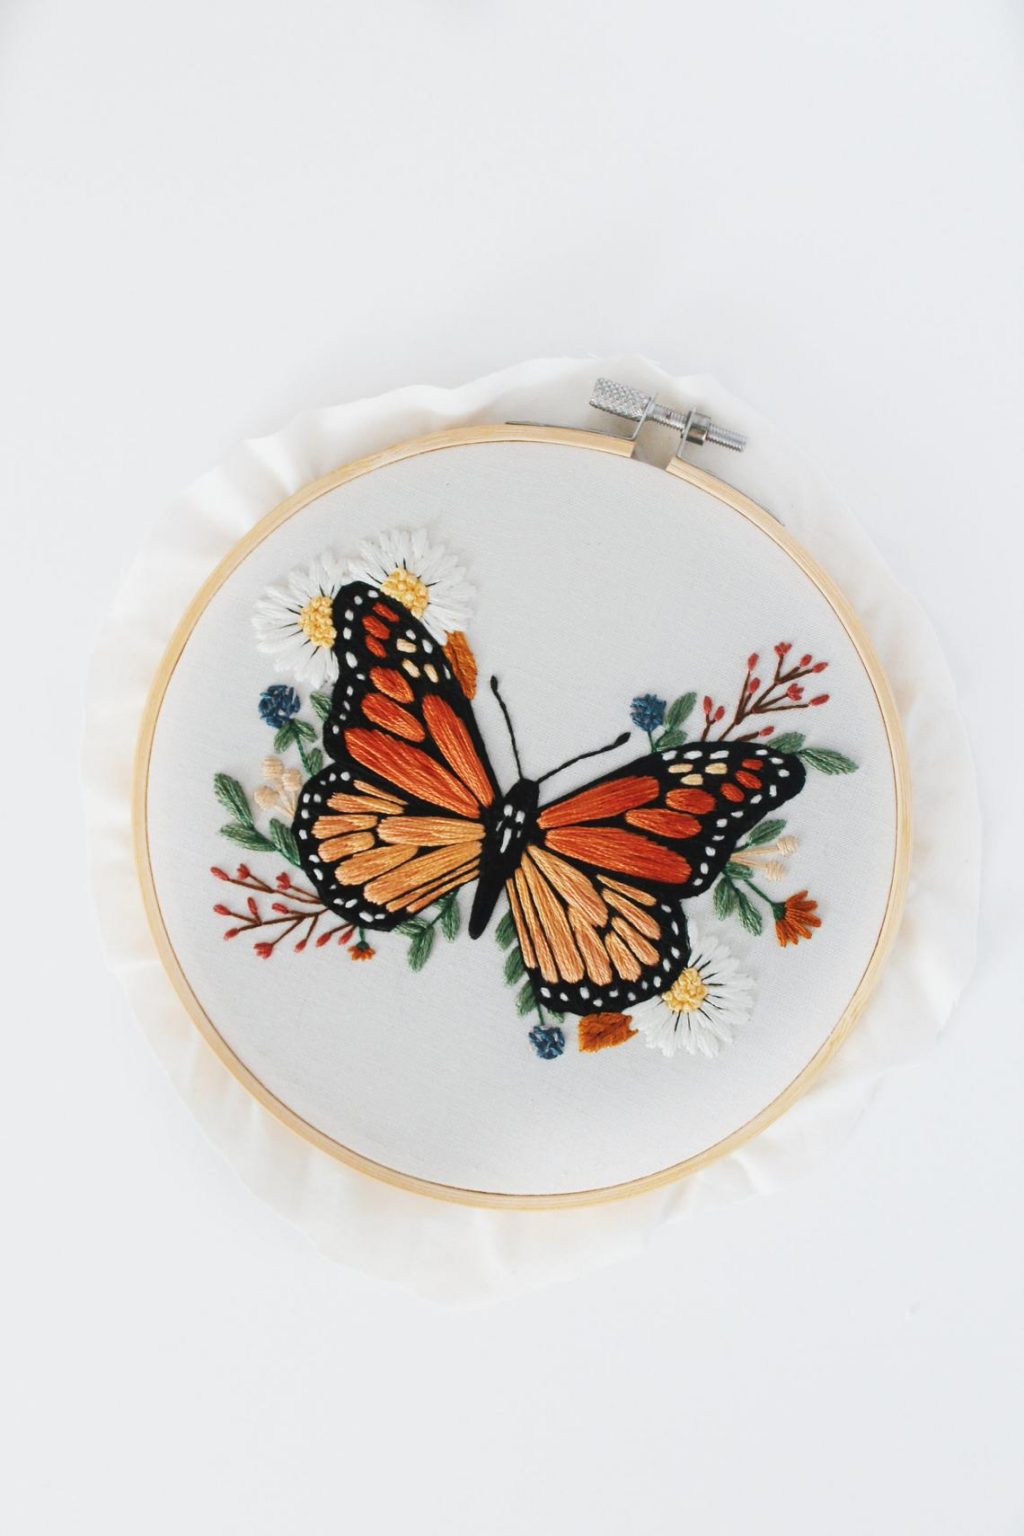 Love Nature and Embroidery? Nature Inspired Embroidery Designs